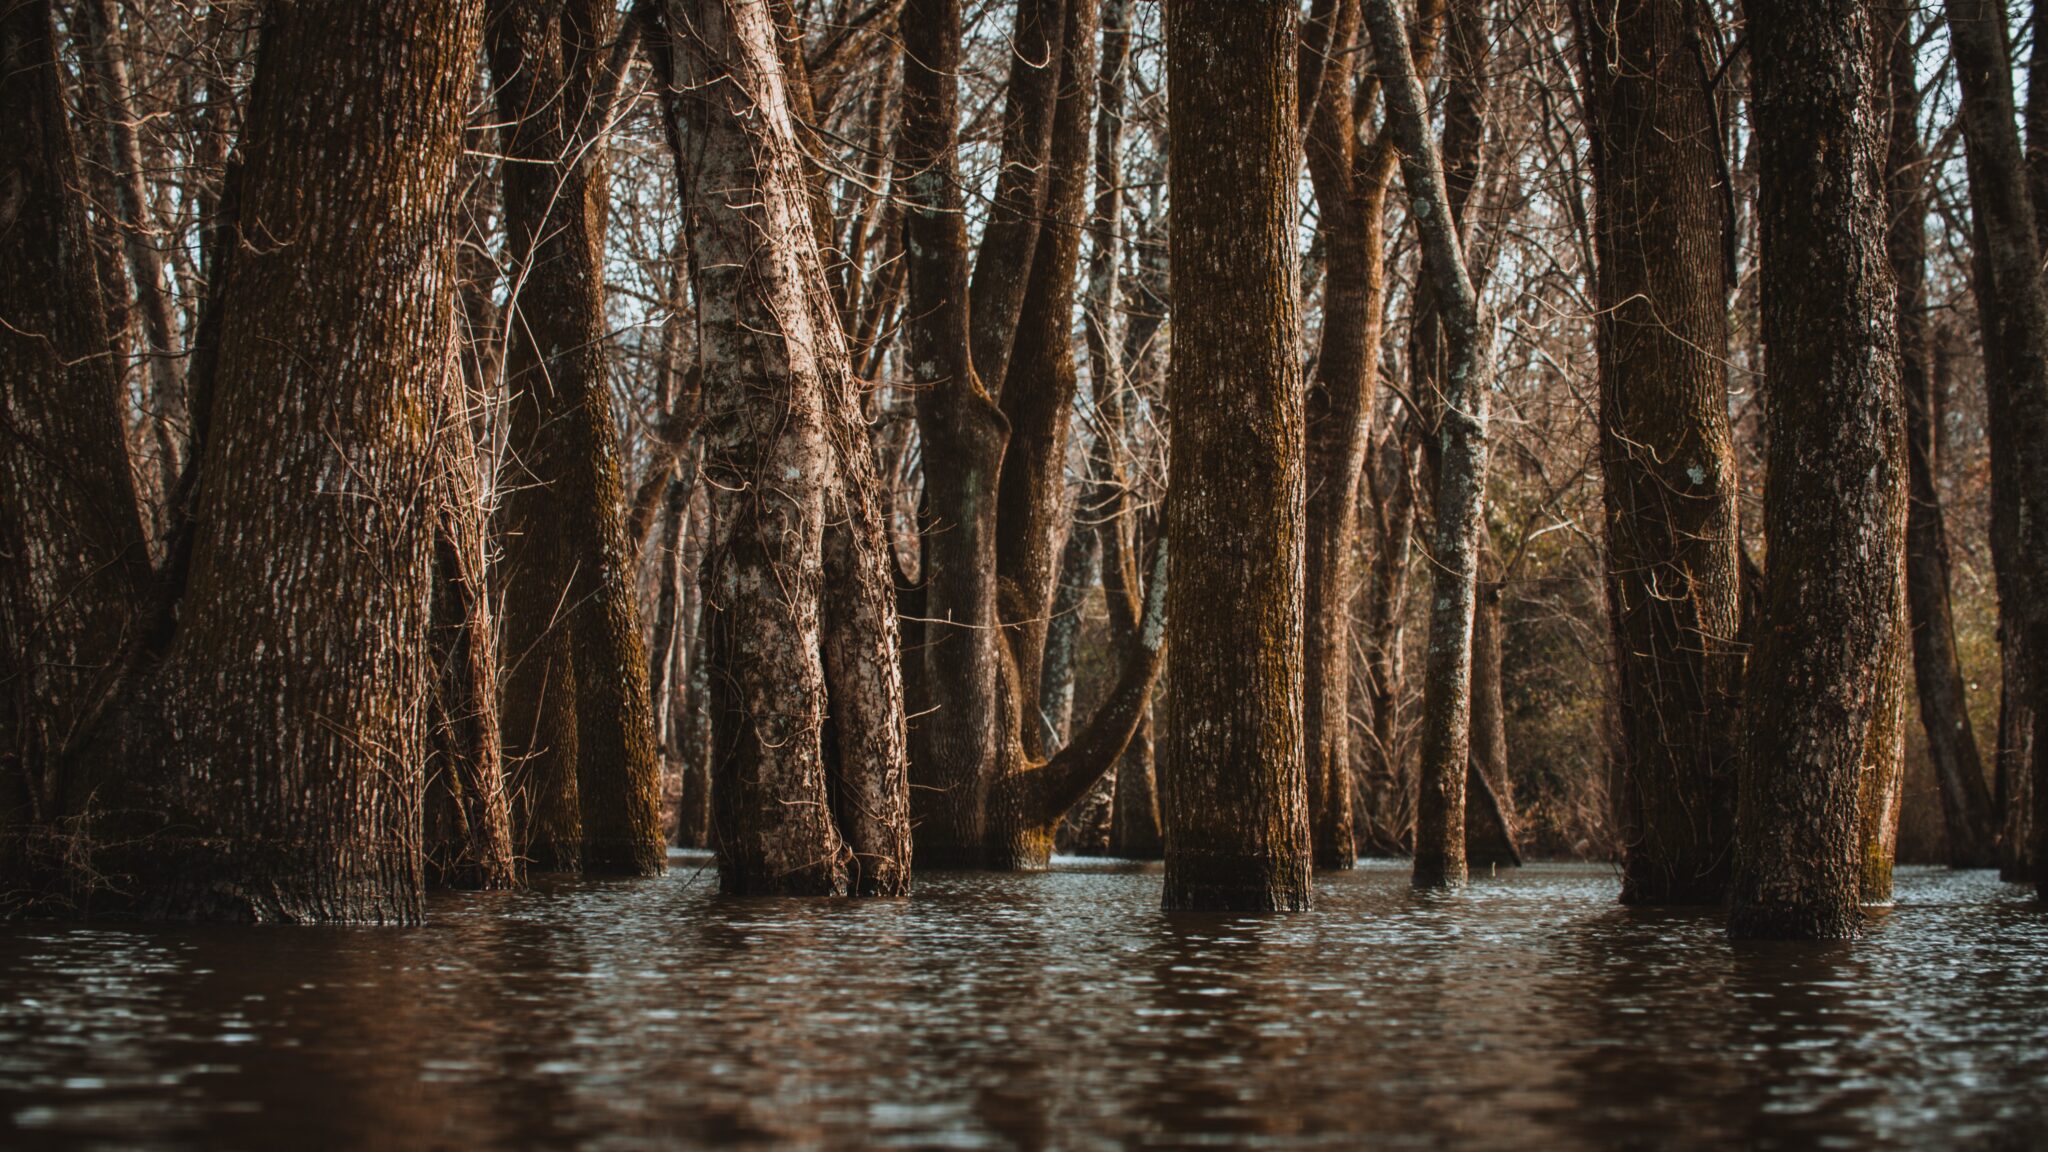 A photo of tree trunks in a lake with water.